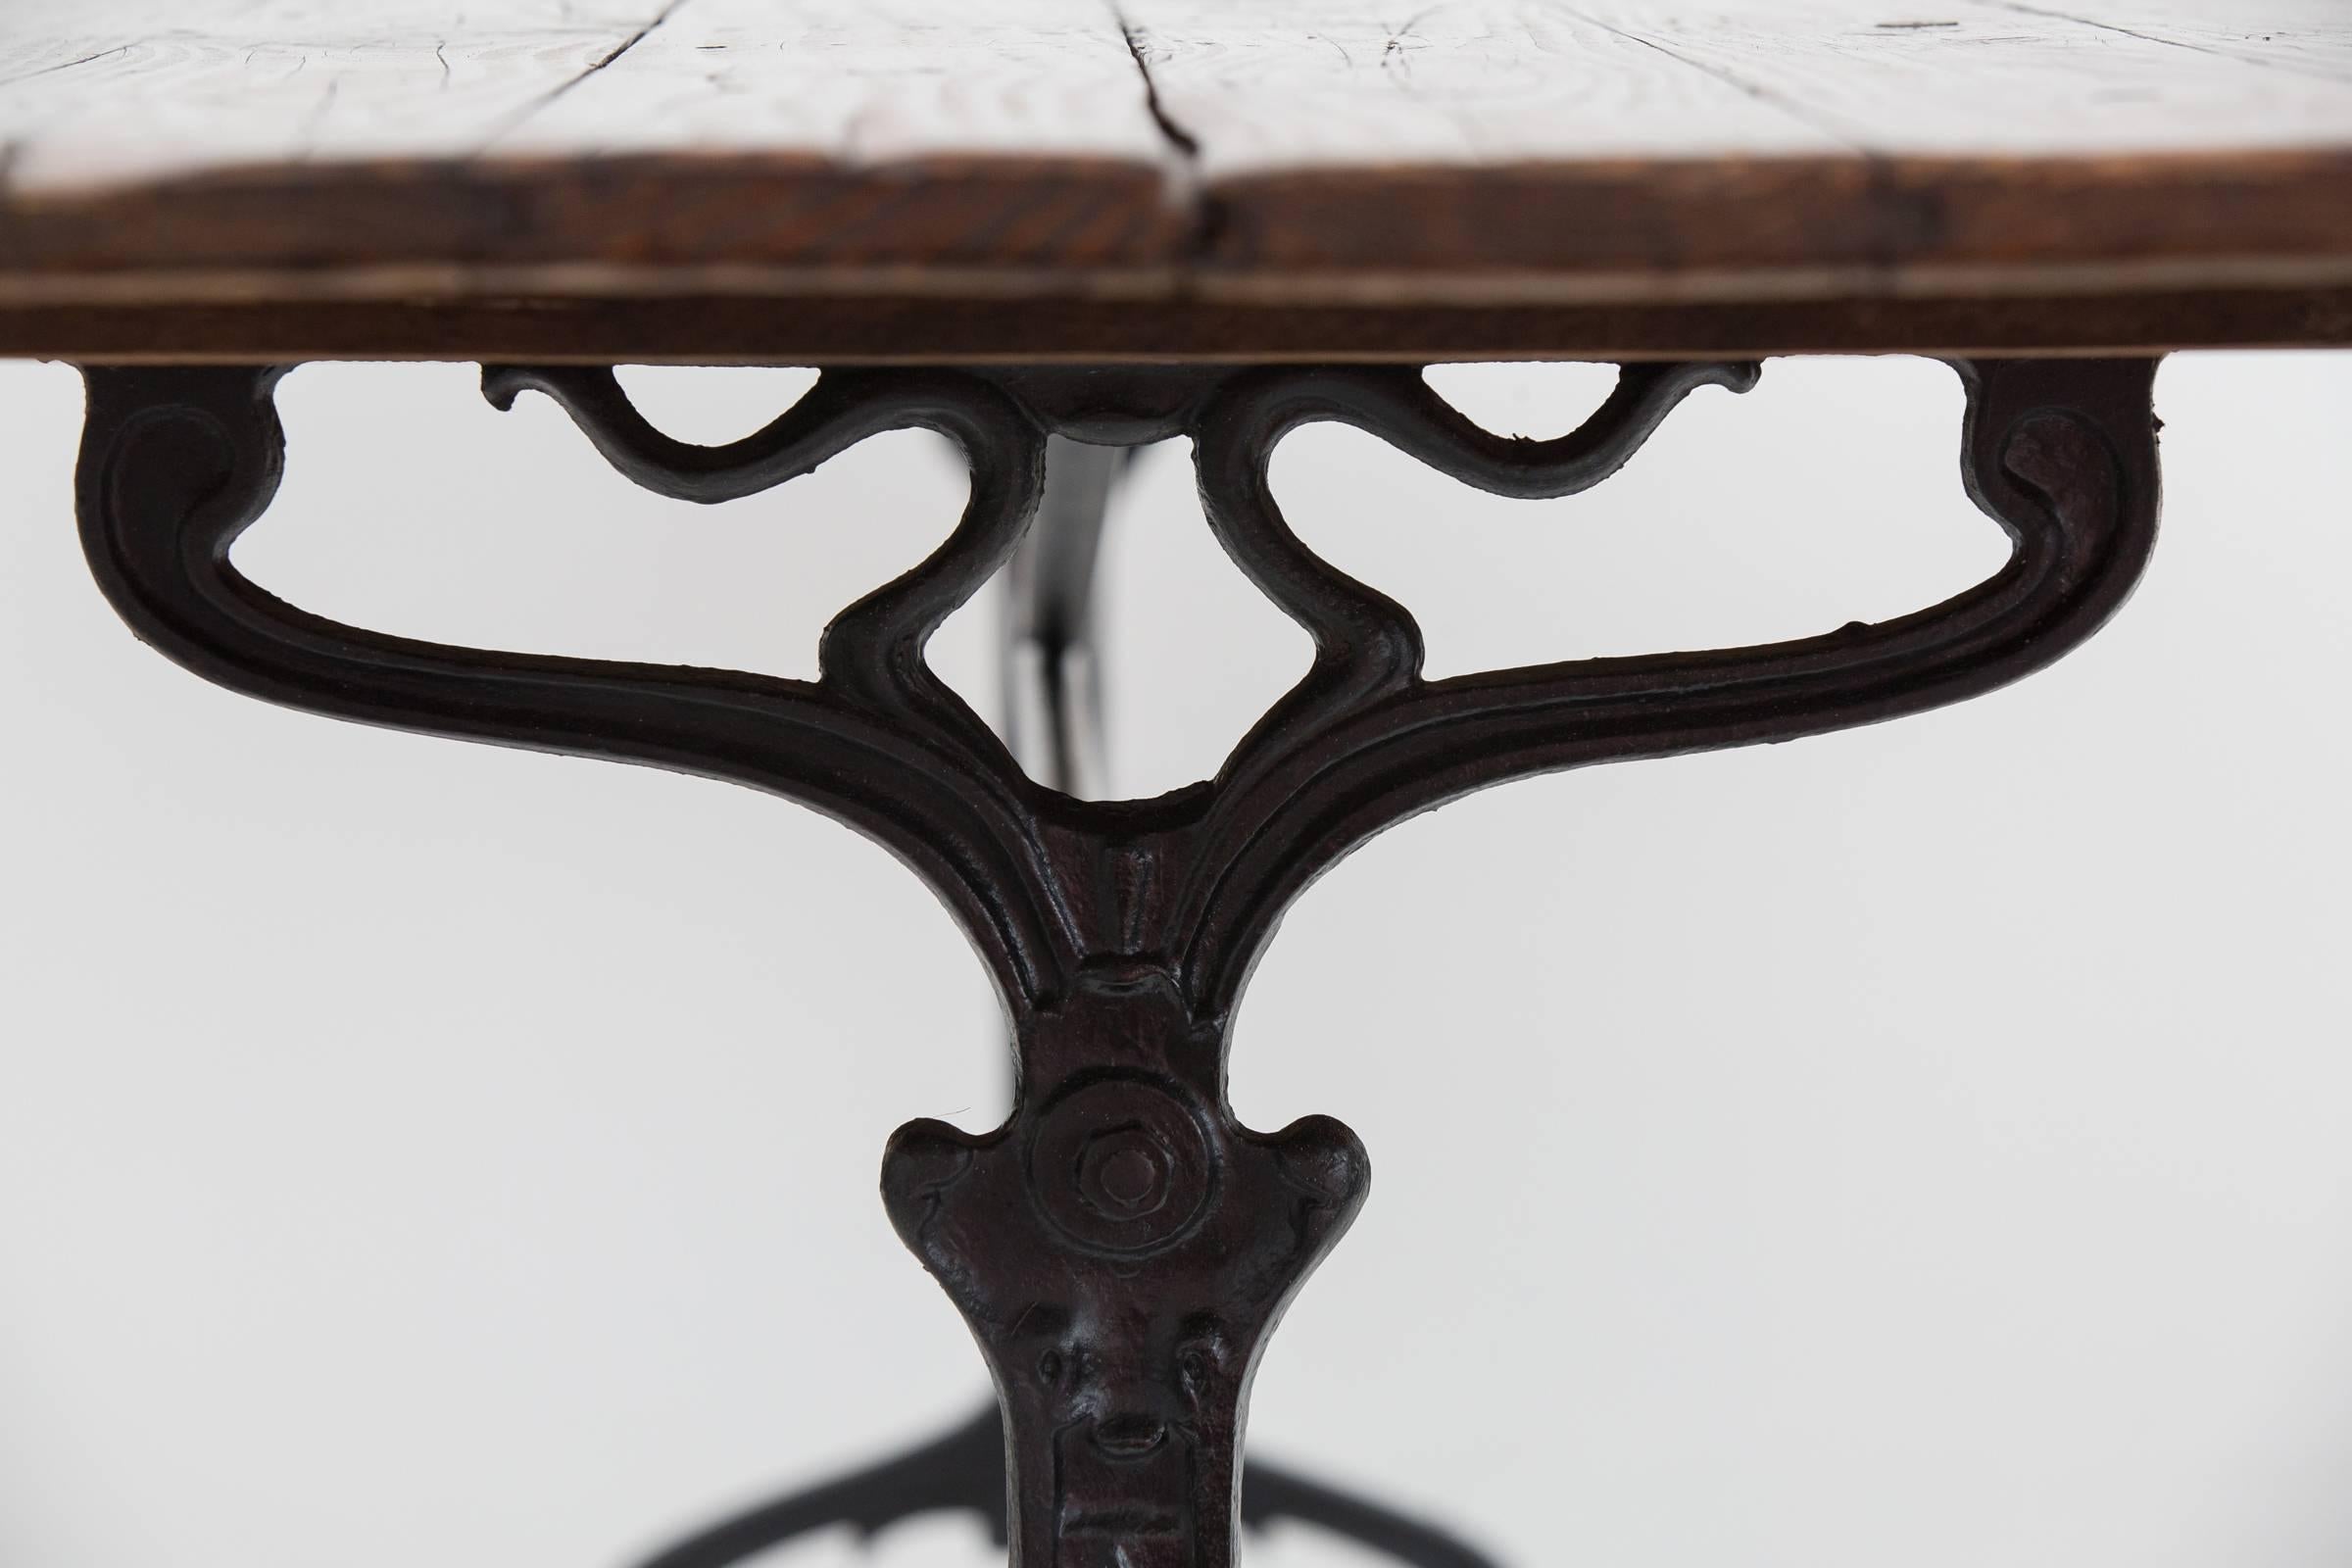 Early 20th Century French Antique Banquet Table from Beaujolais Region